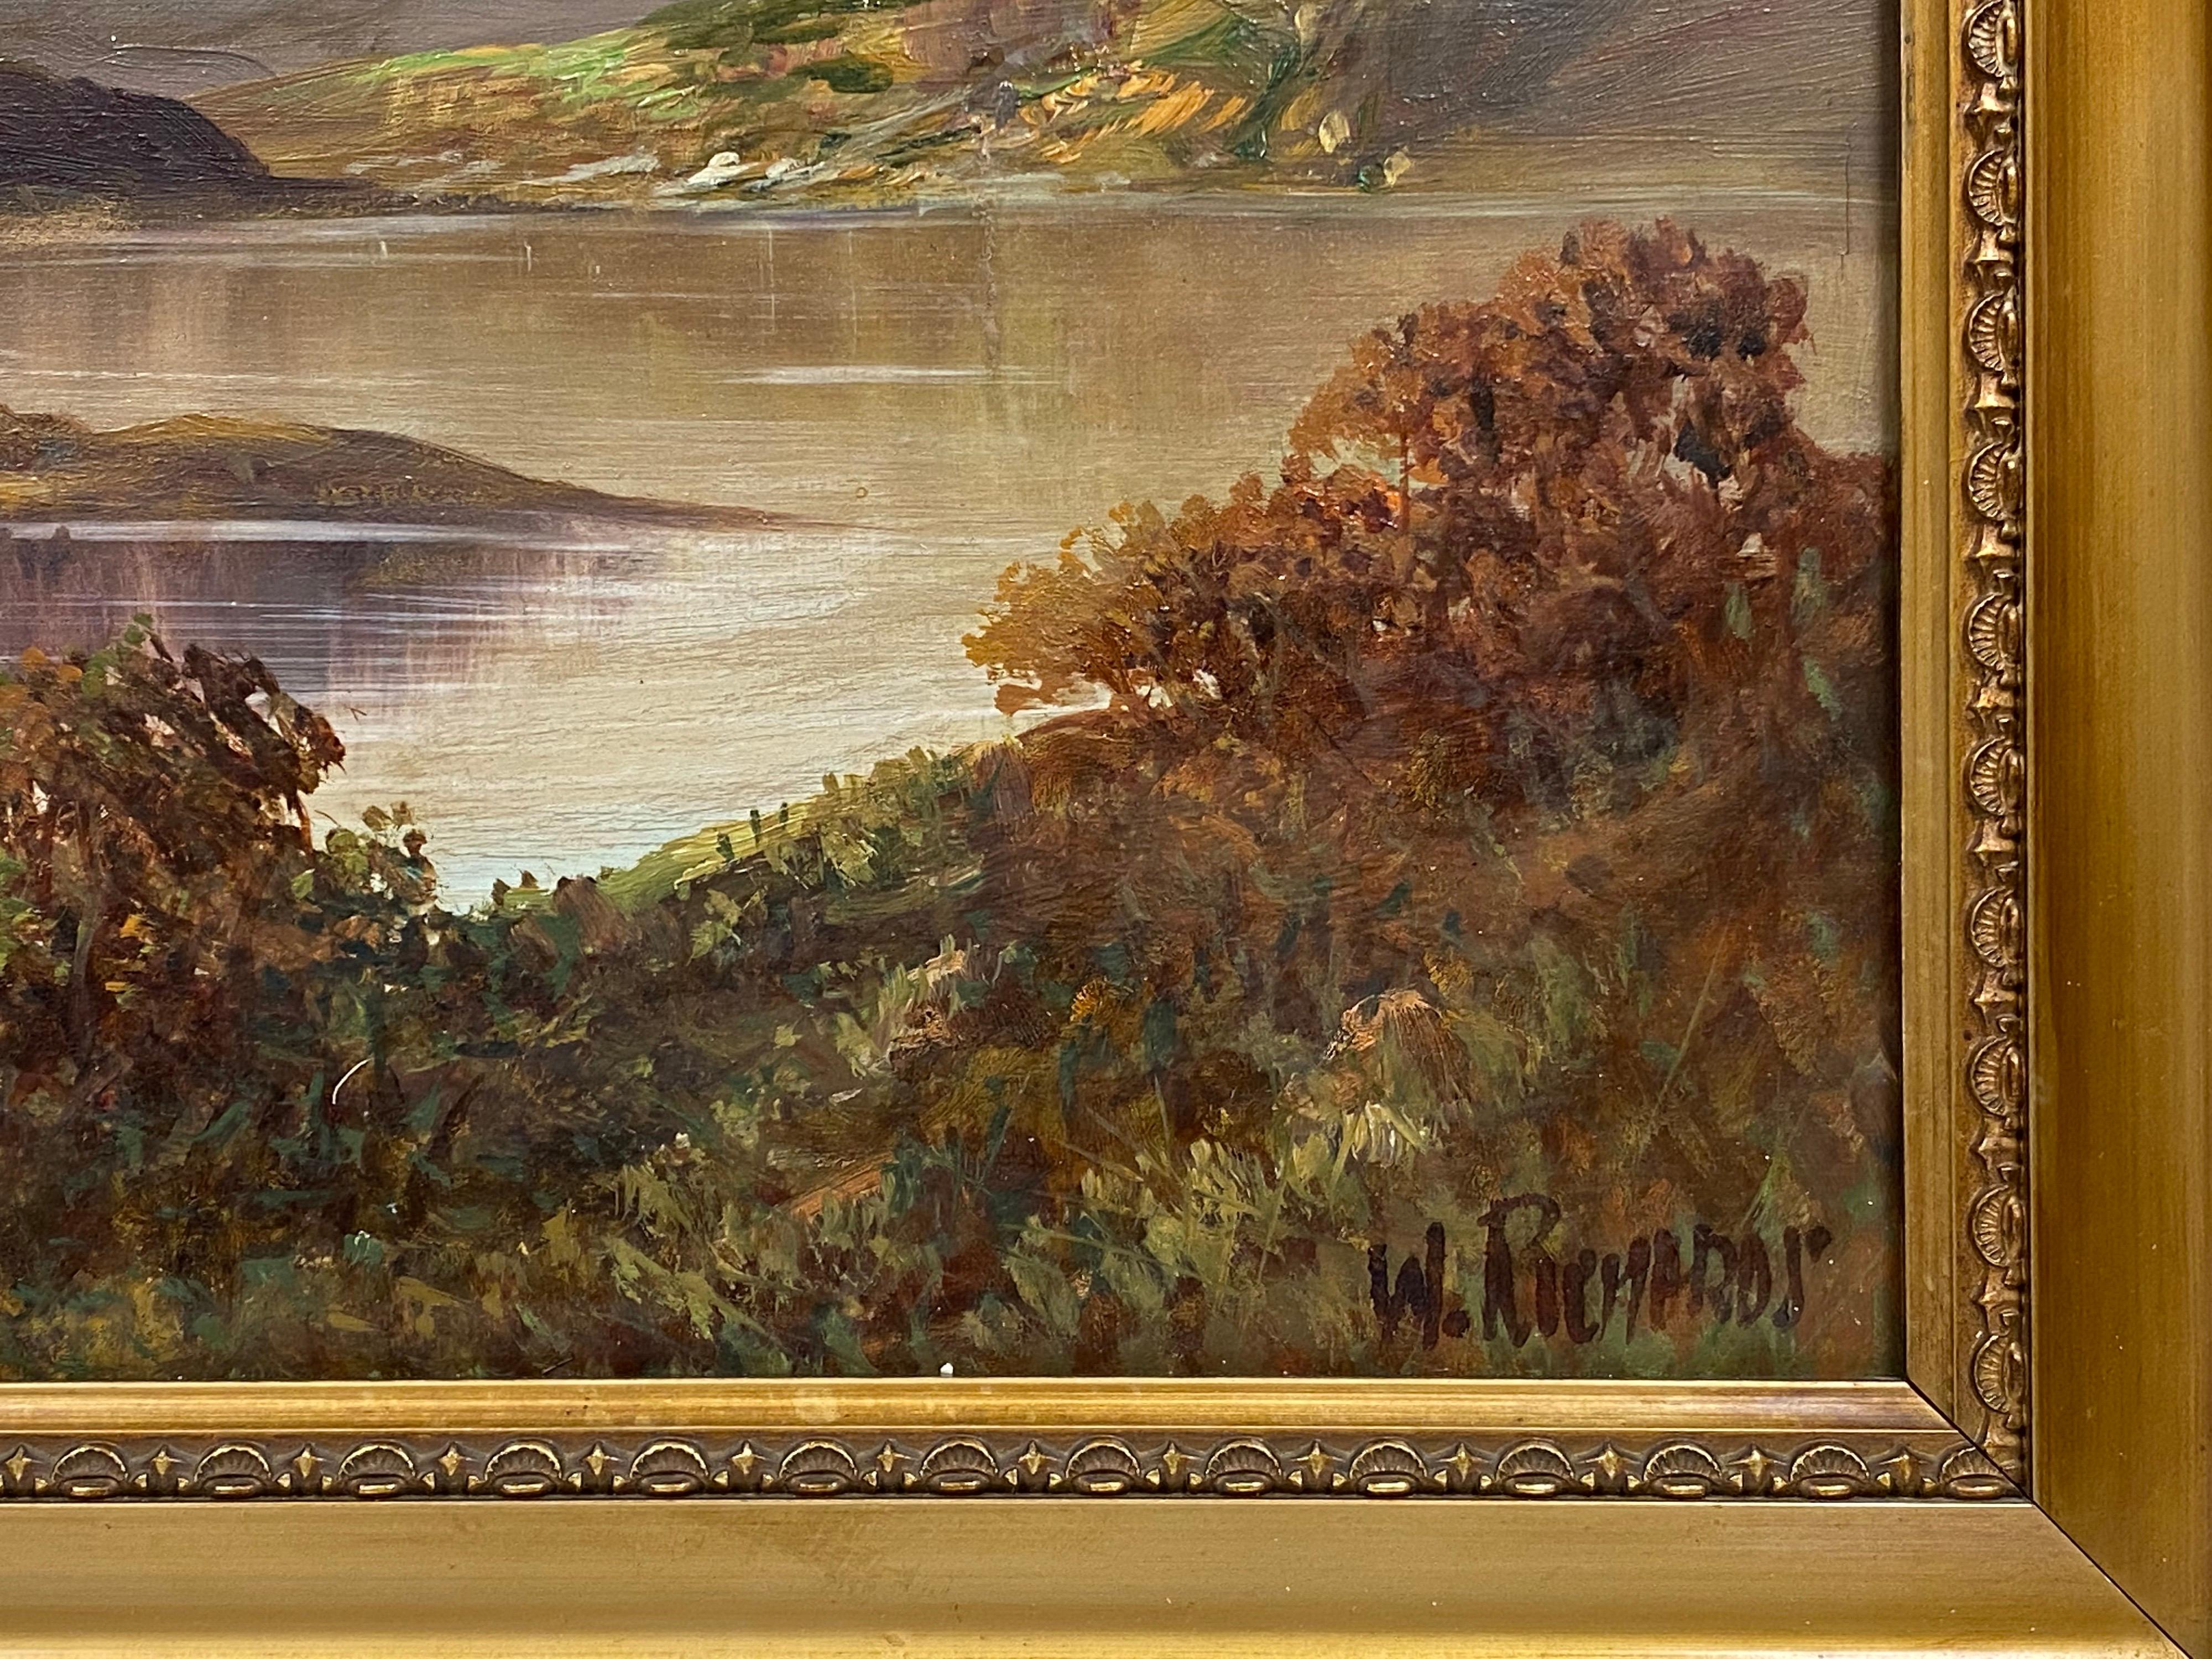 Loch Lomond Large Antique Scottish Framed Highlands Oil Painting  - Brown Figurative Painting by Francis E. Jamieson